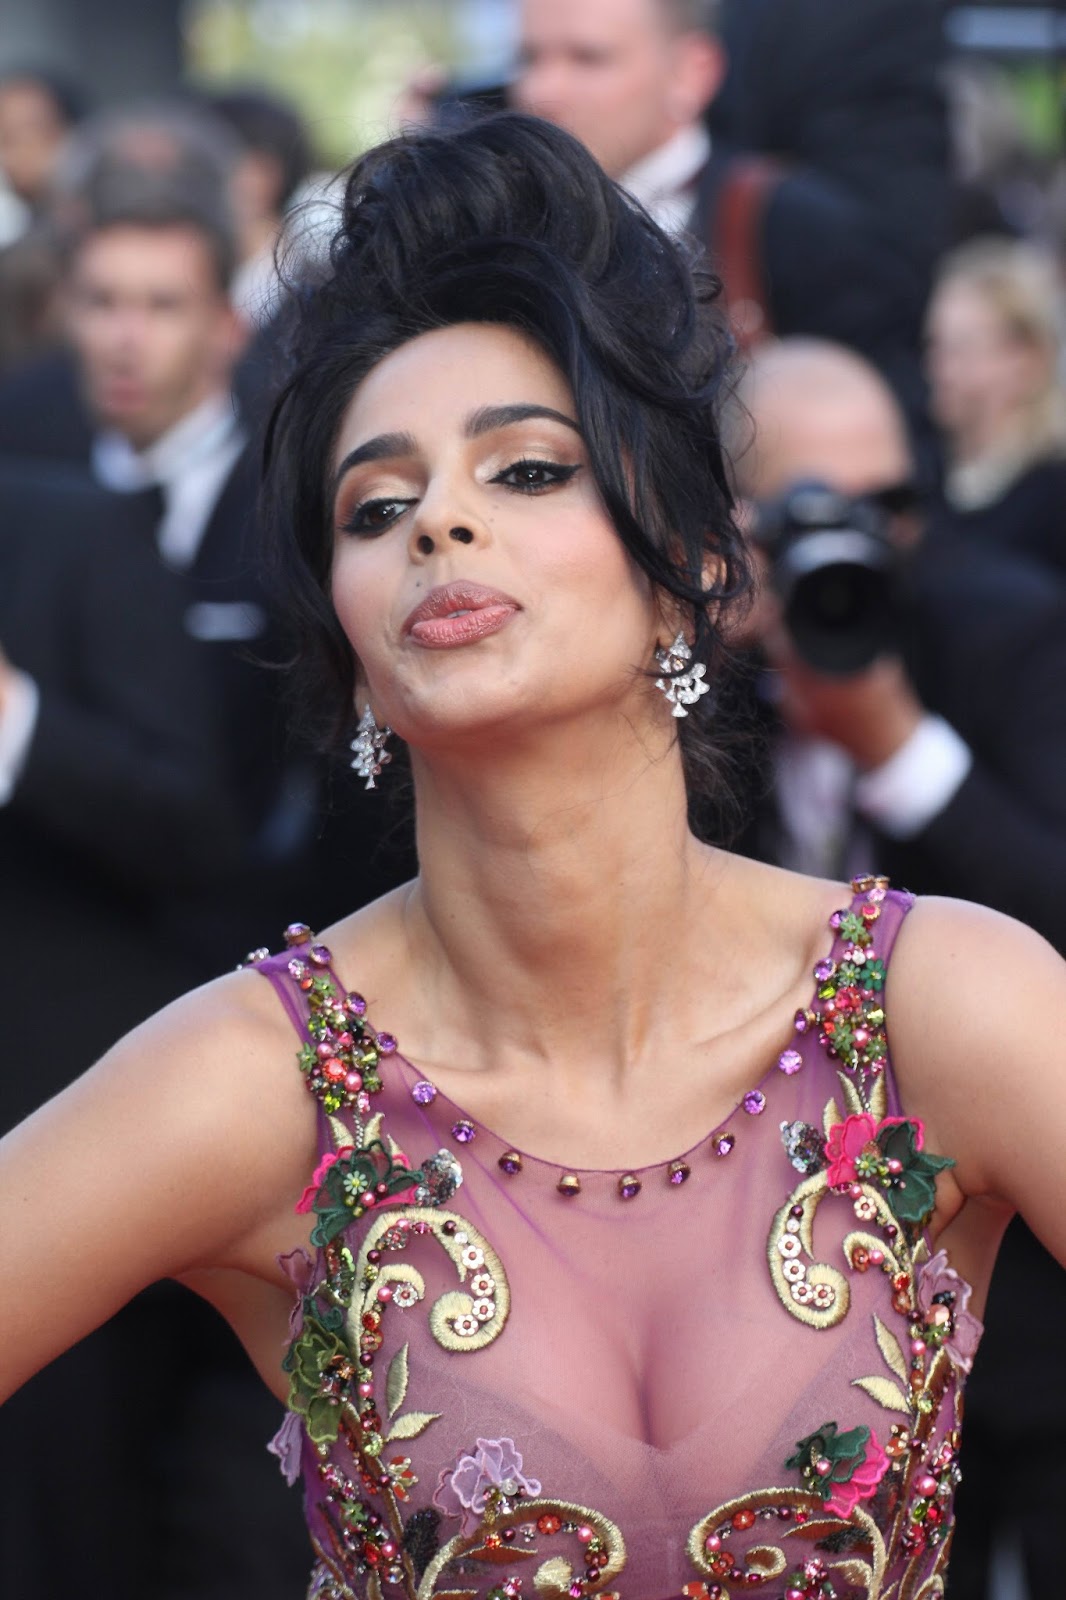 Mallika Sherawat Looks Hot At 'The Beguiled' Premiere During The 70th Cannes Film Festival 2017